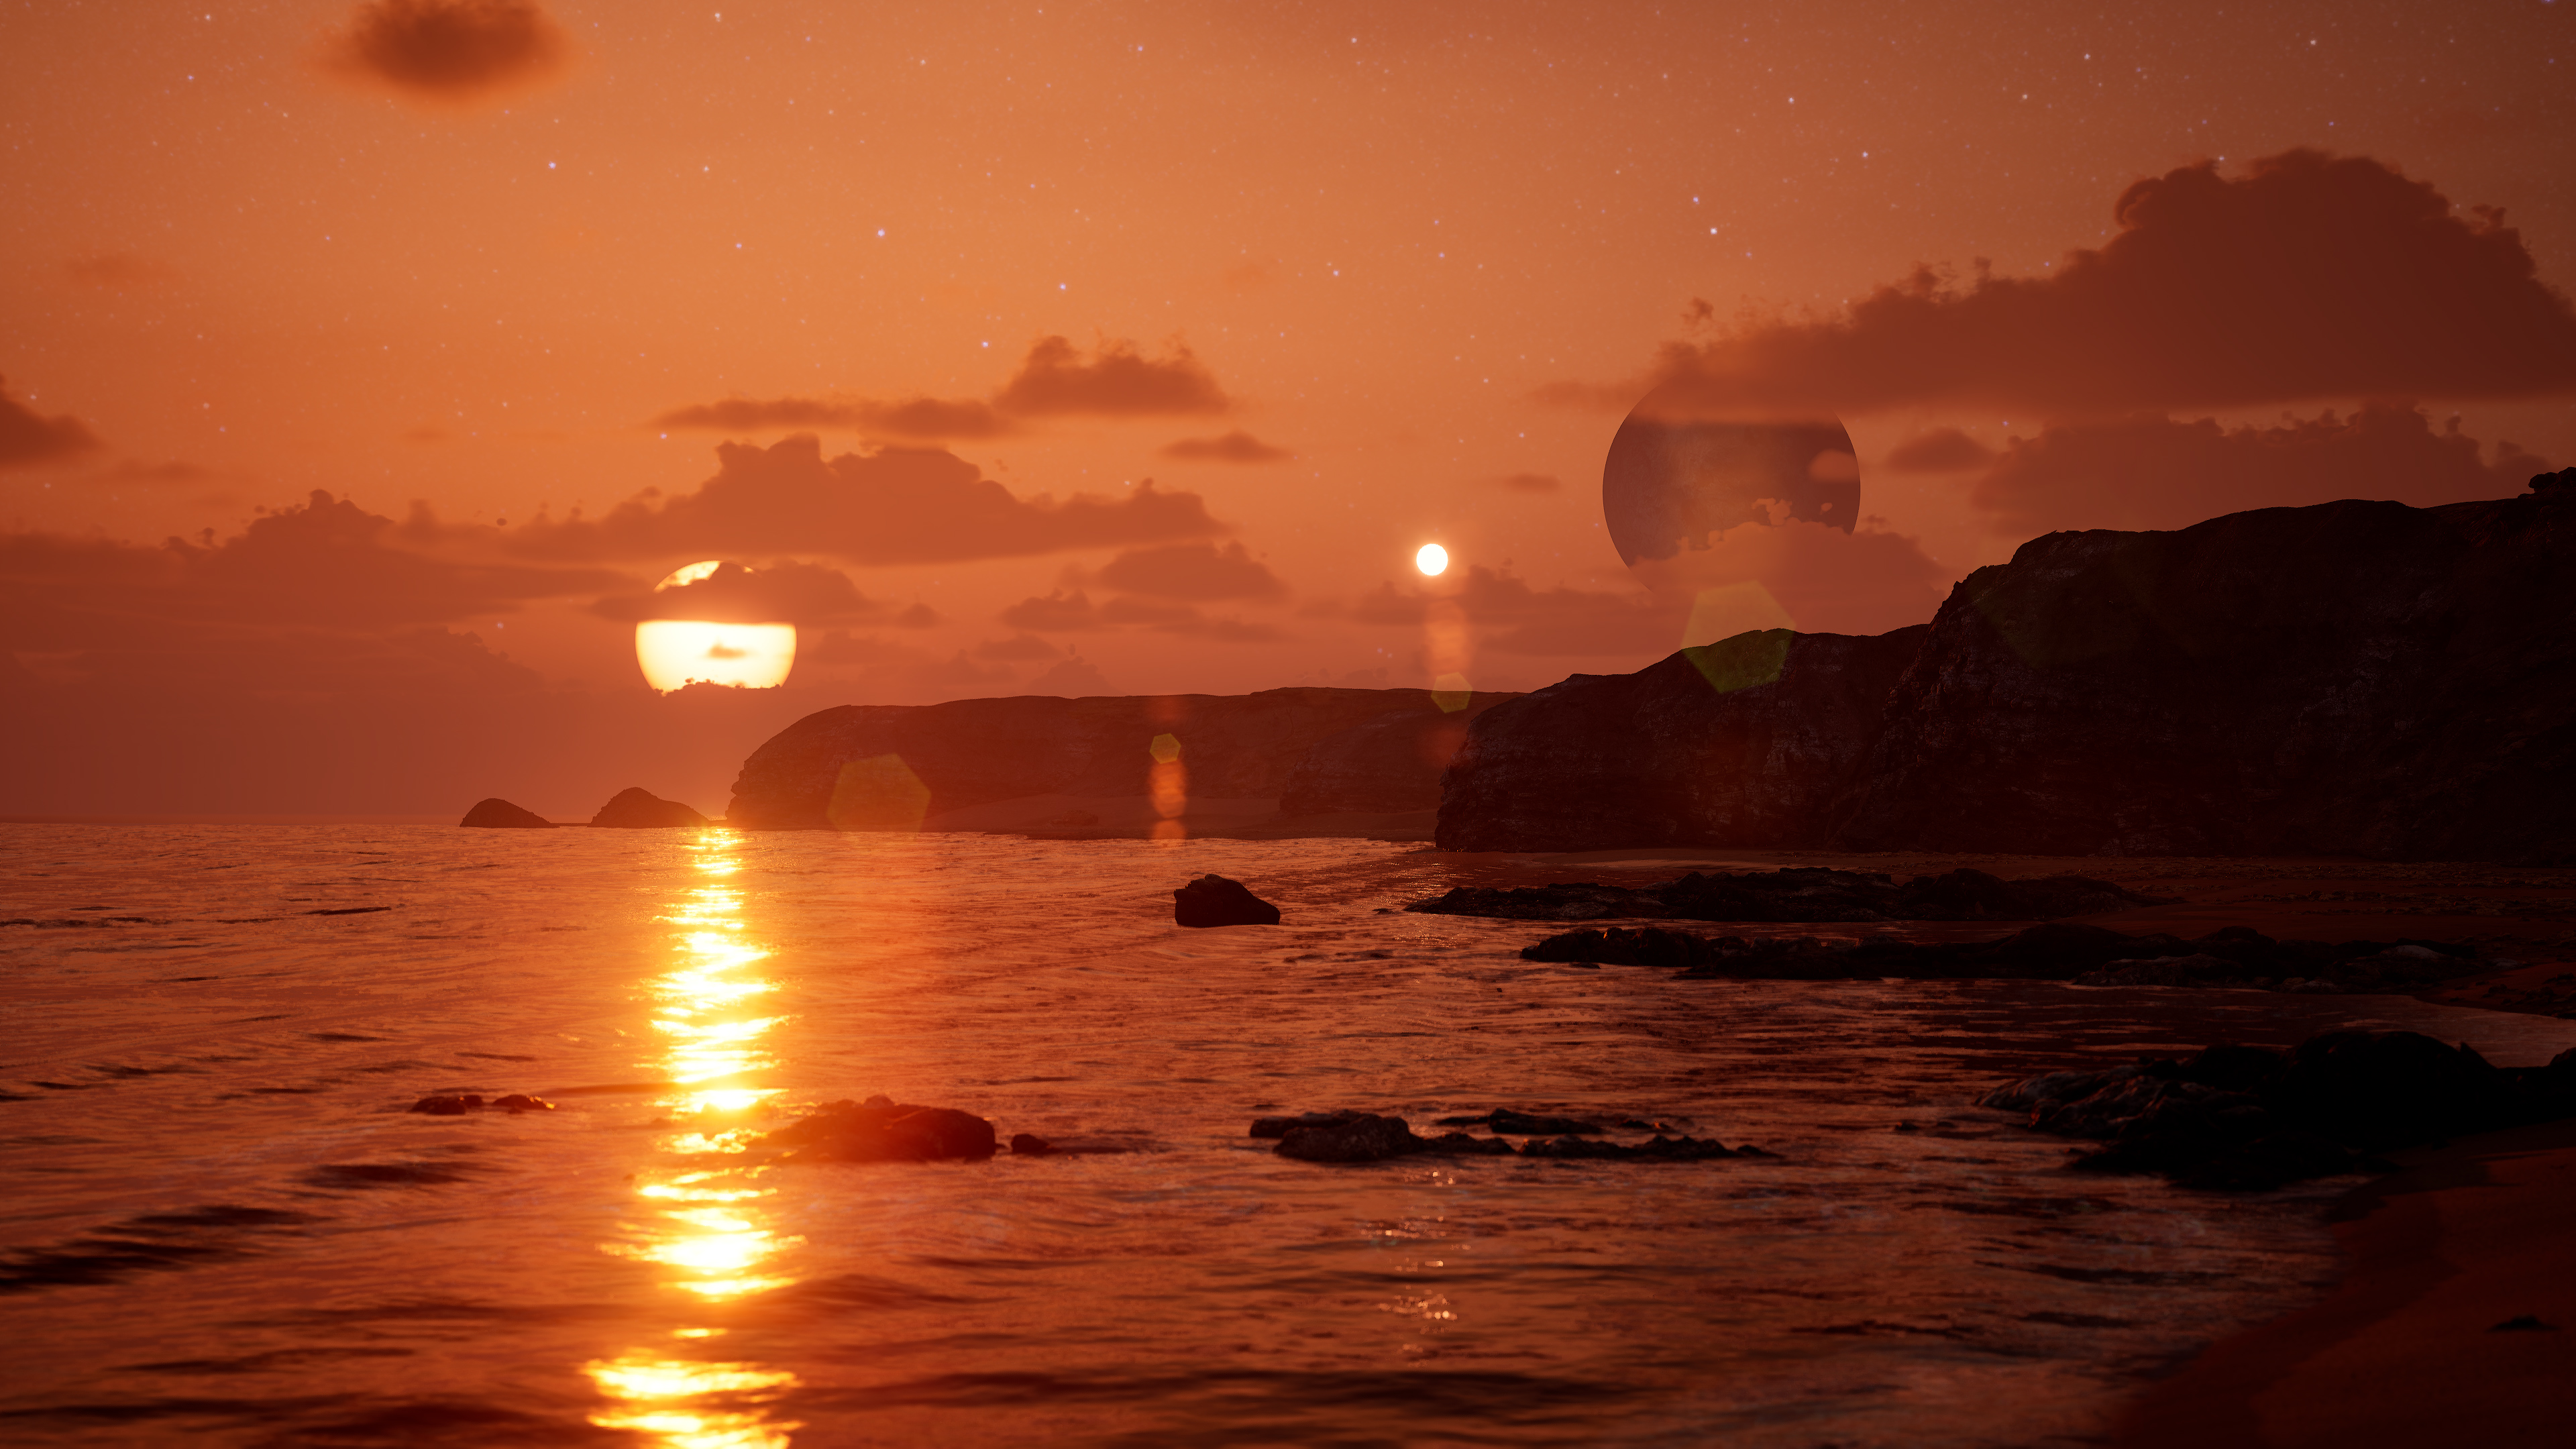 A detailed look at the exoplanet beach landscape animation featuring the binary star sunset and expansive ocean.